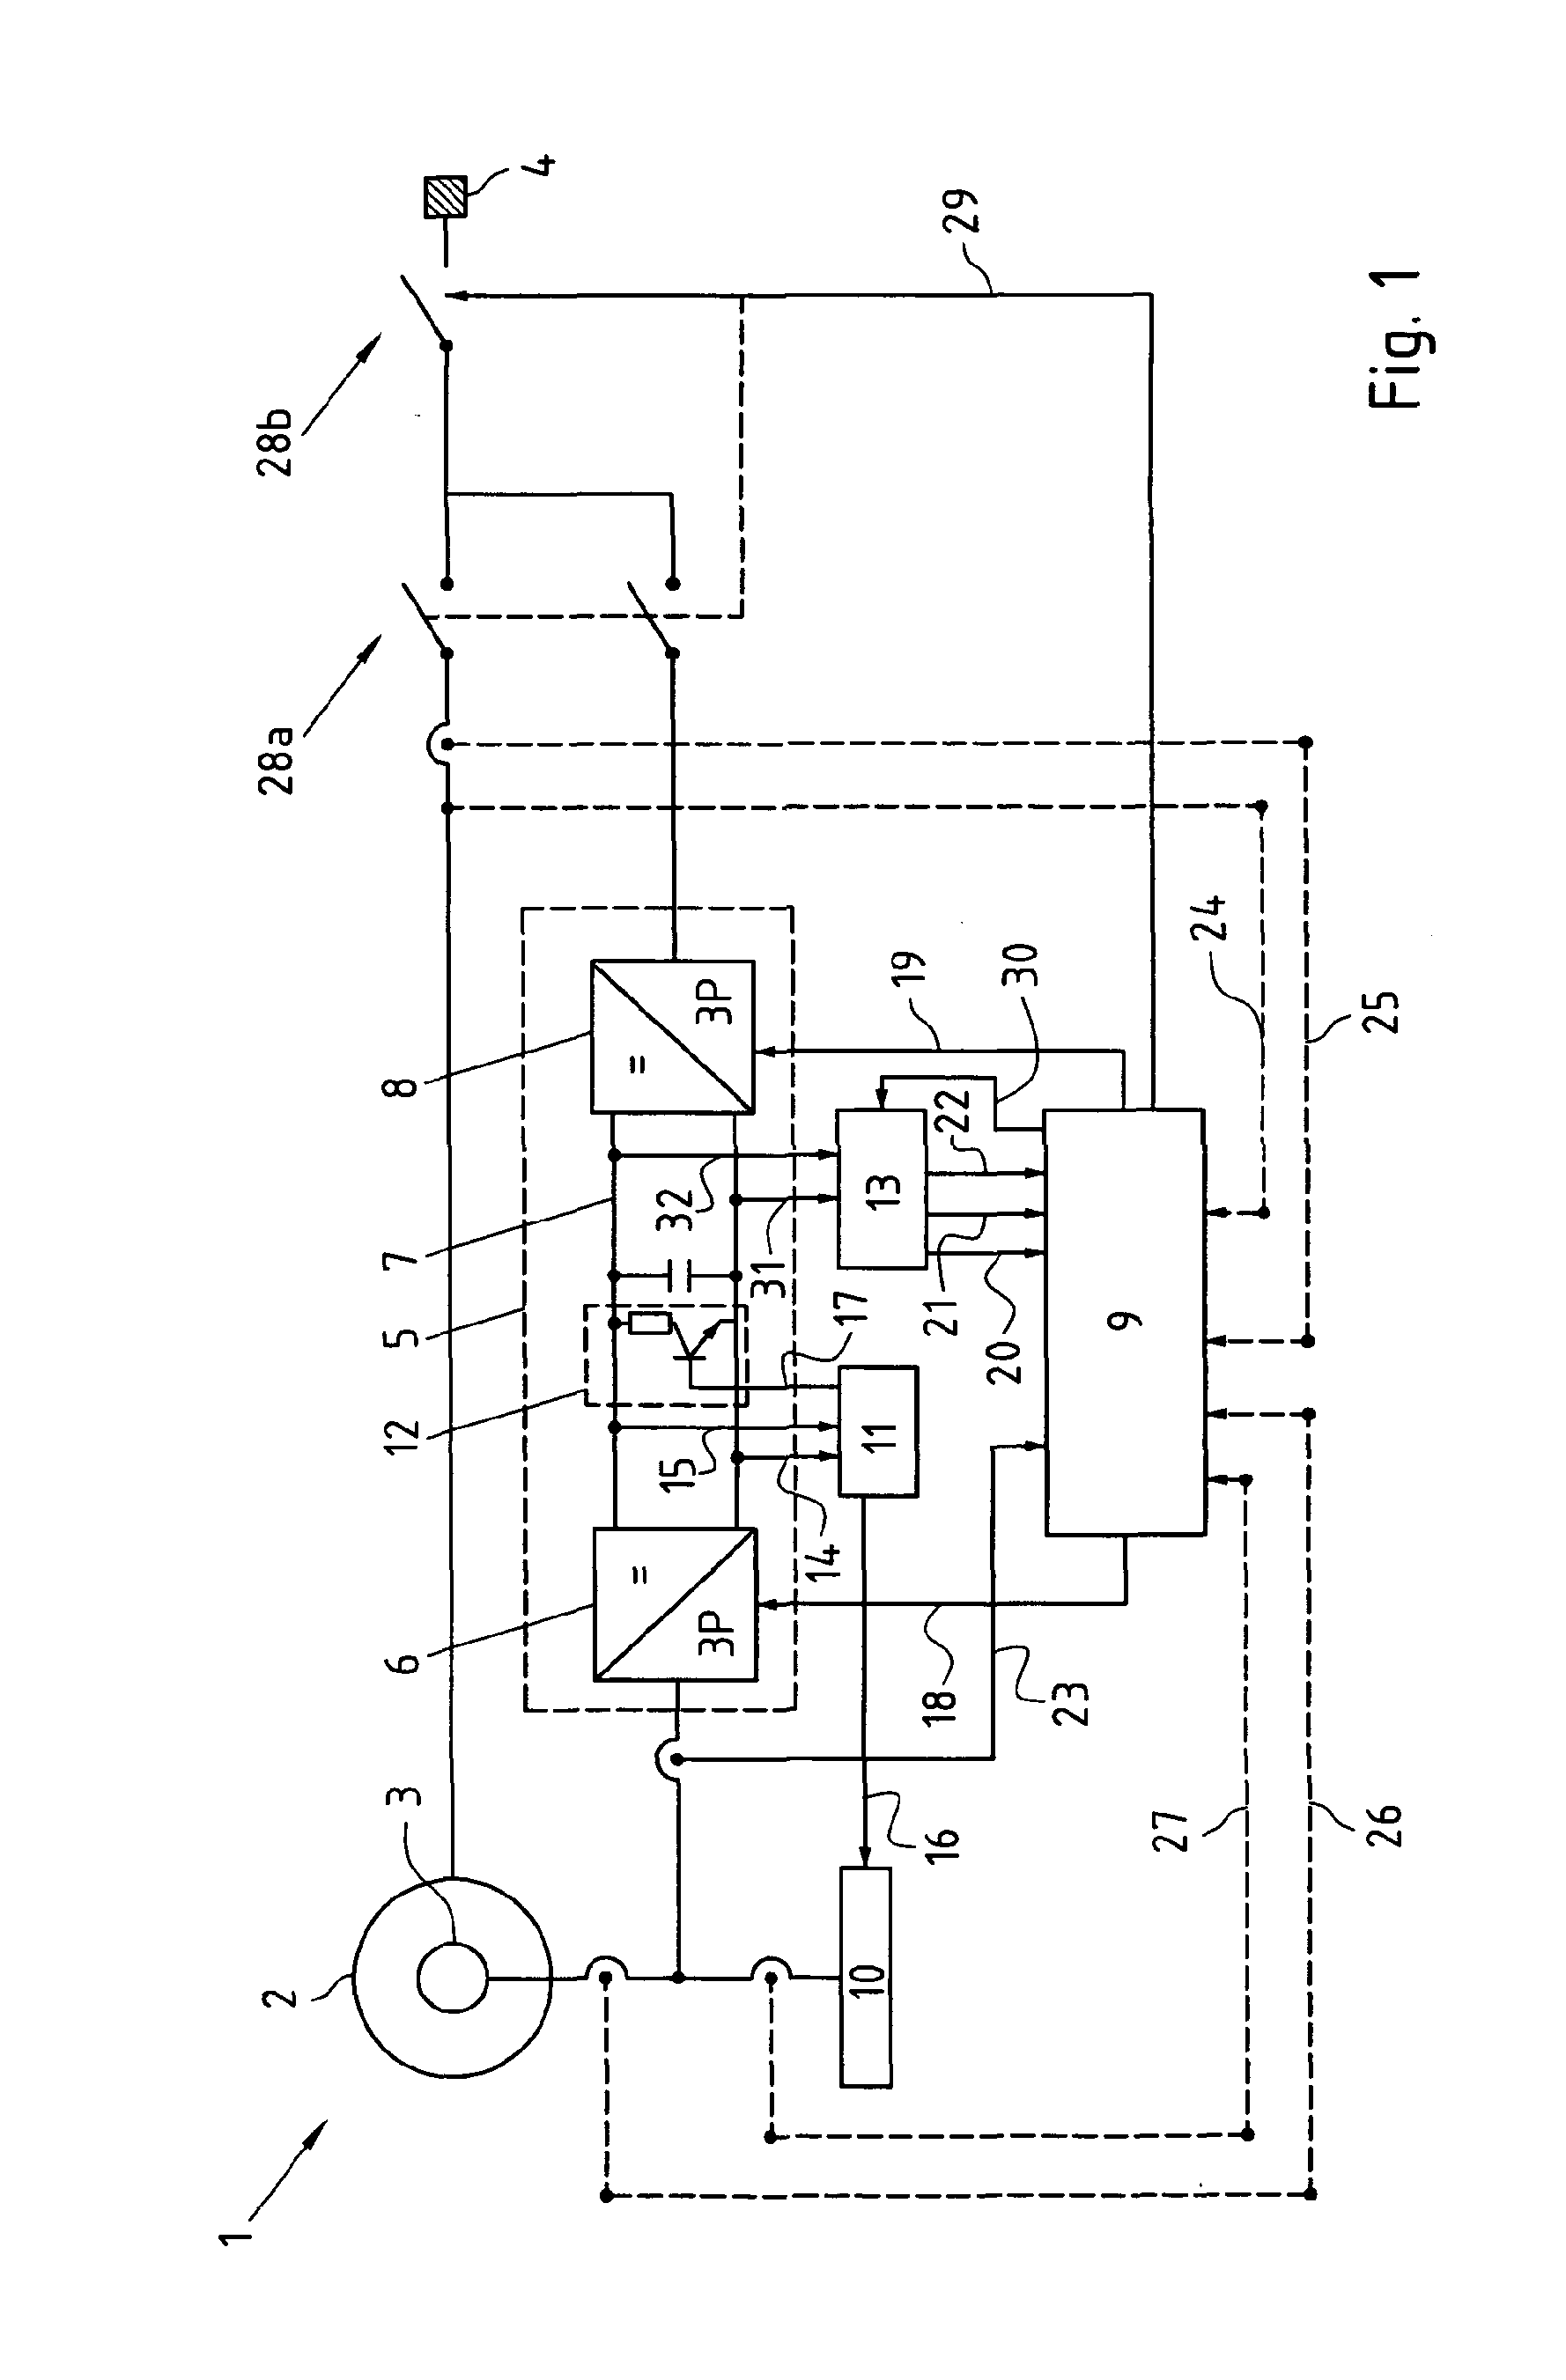 Protection System of a Doubly-fed Induction Machine